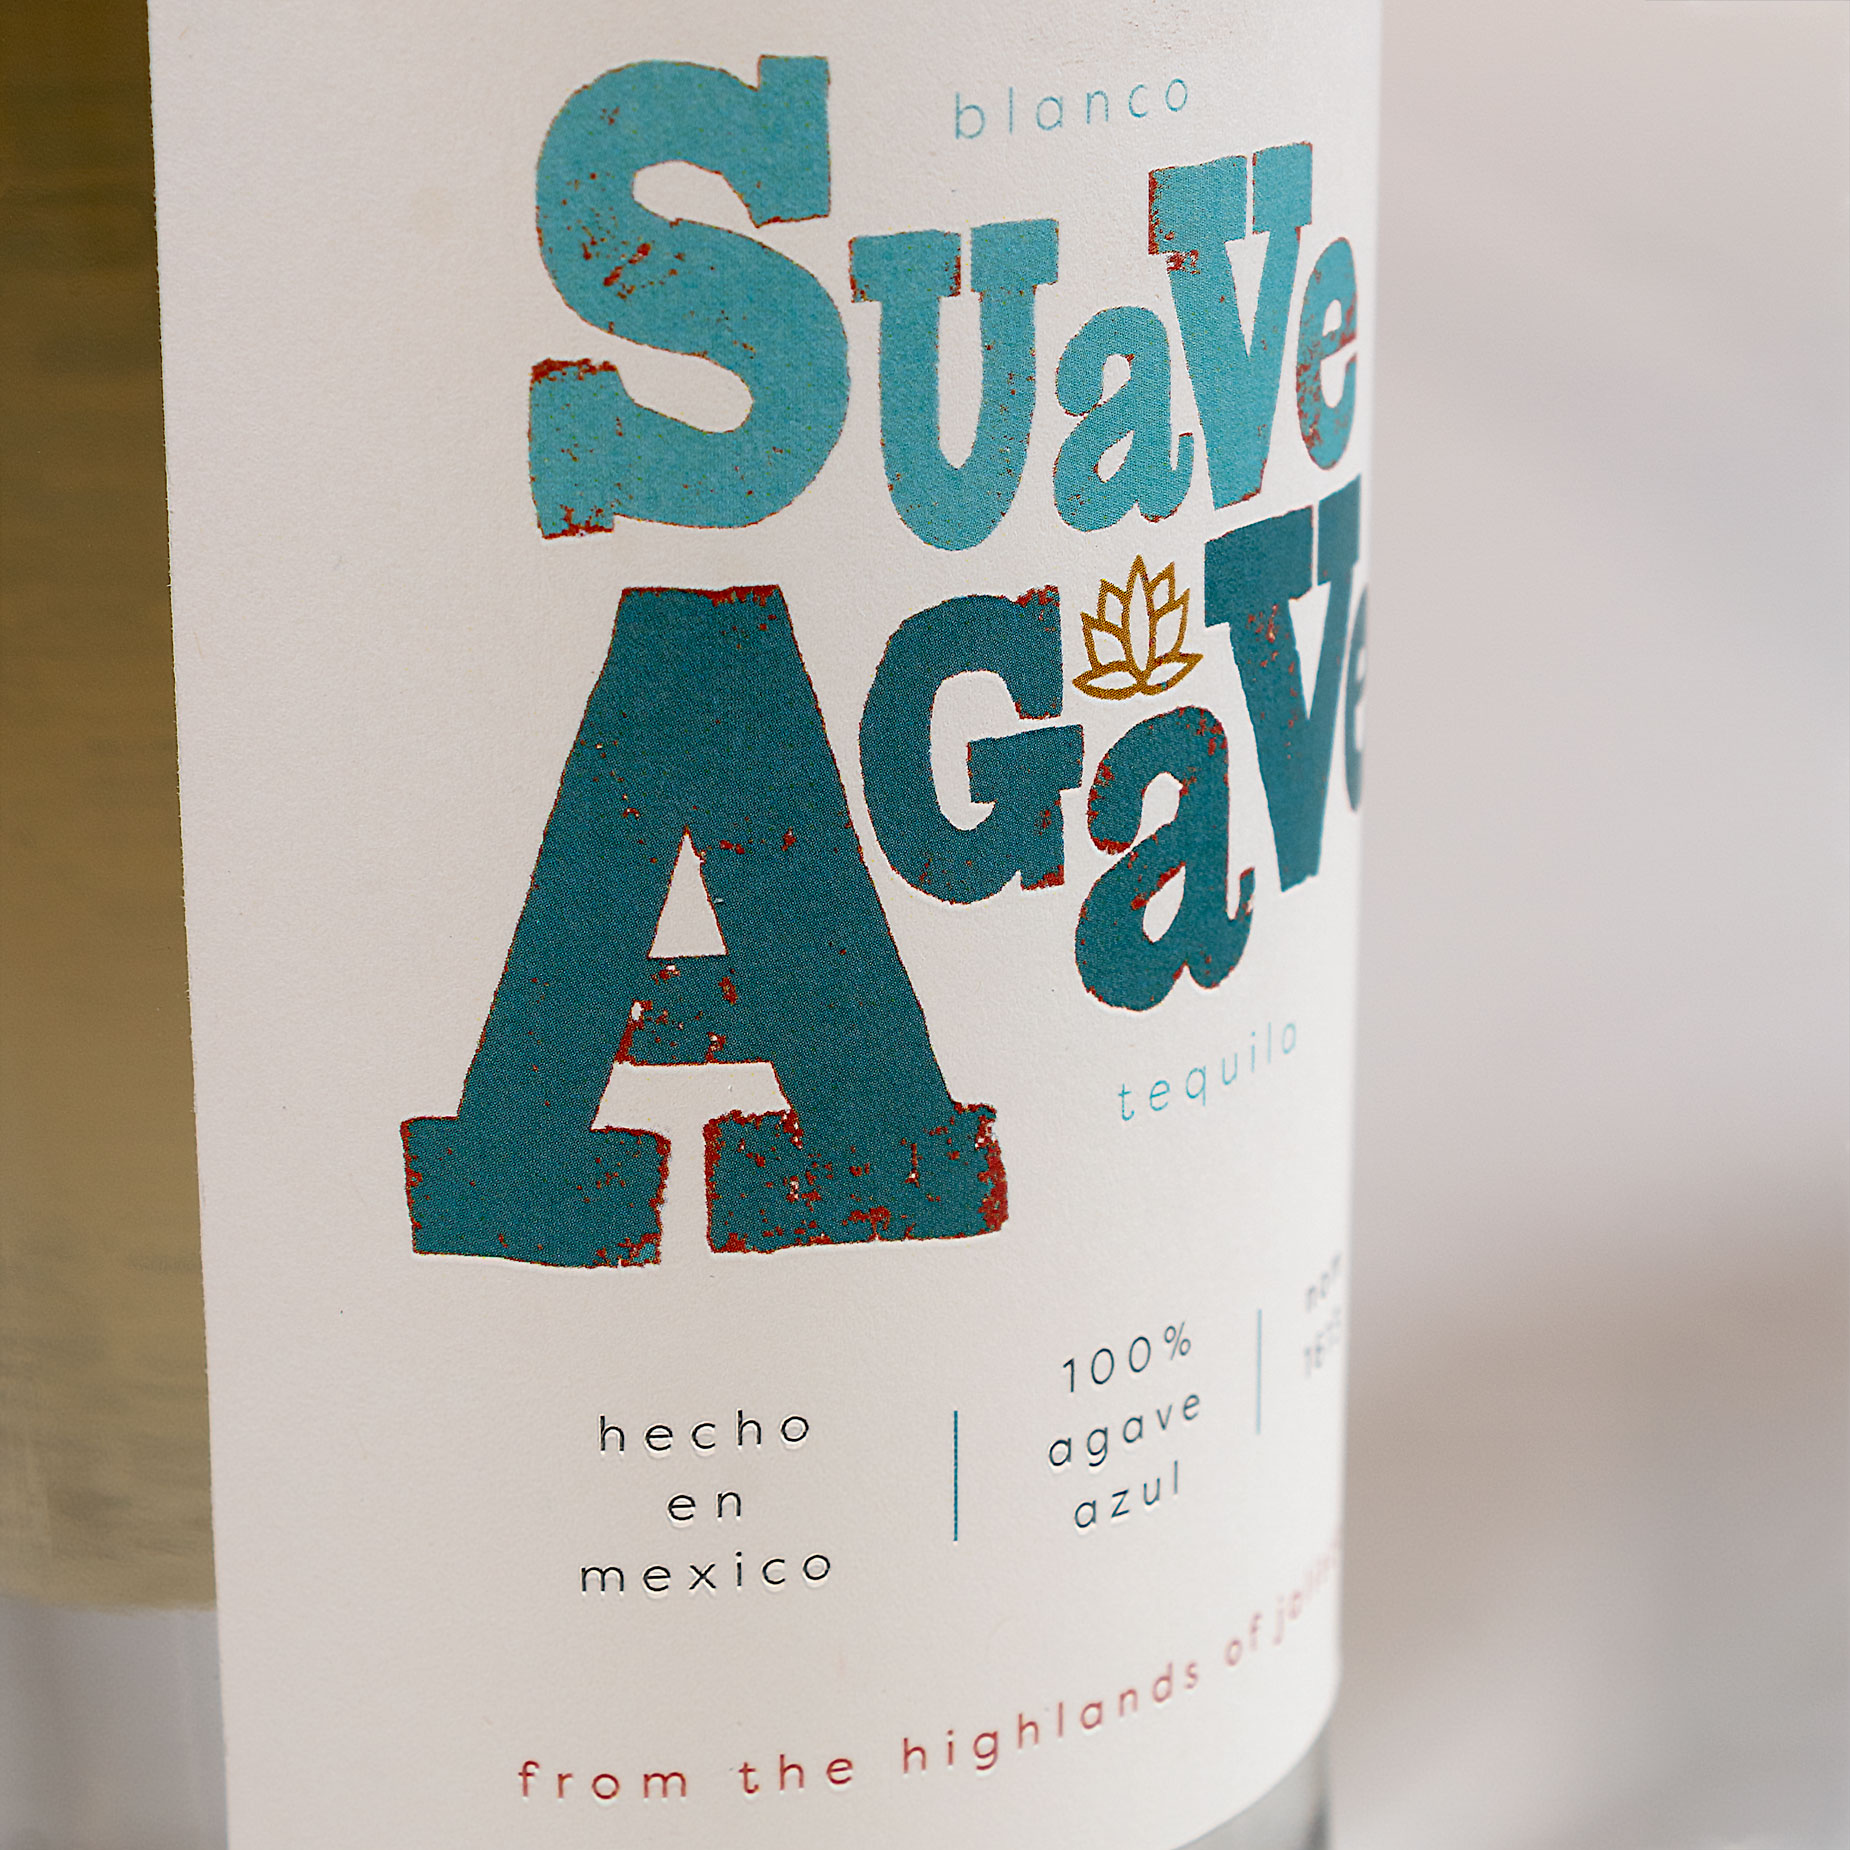 Suave Agave Tequila